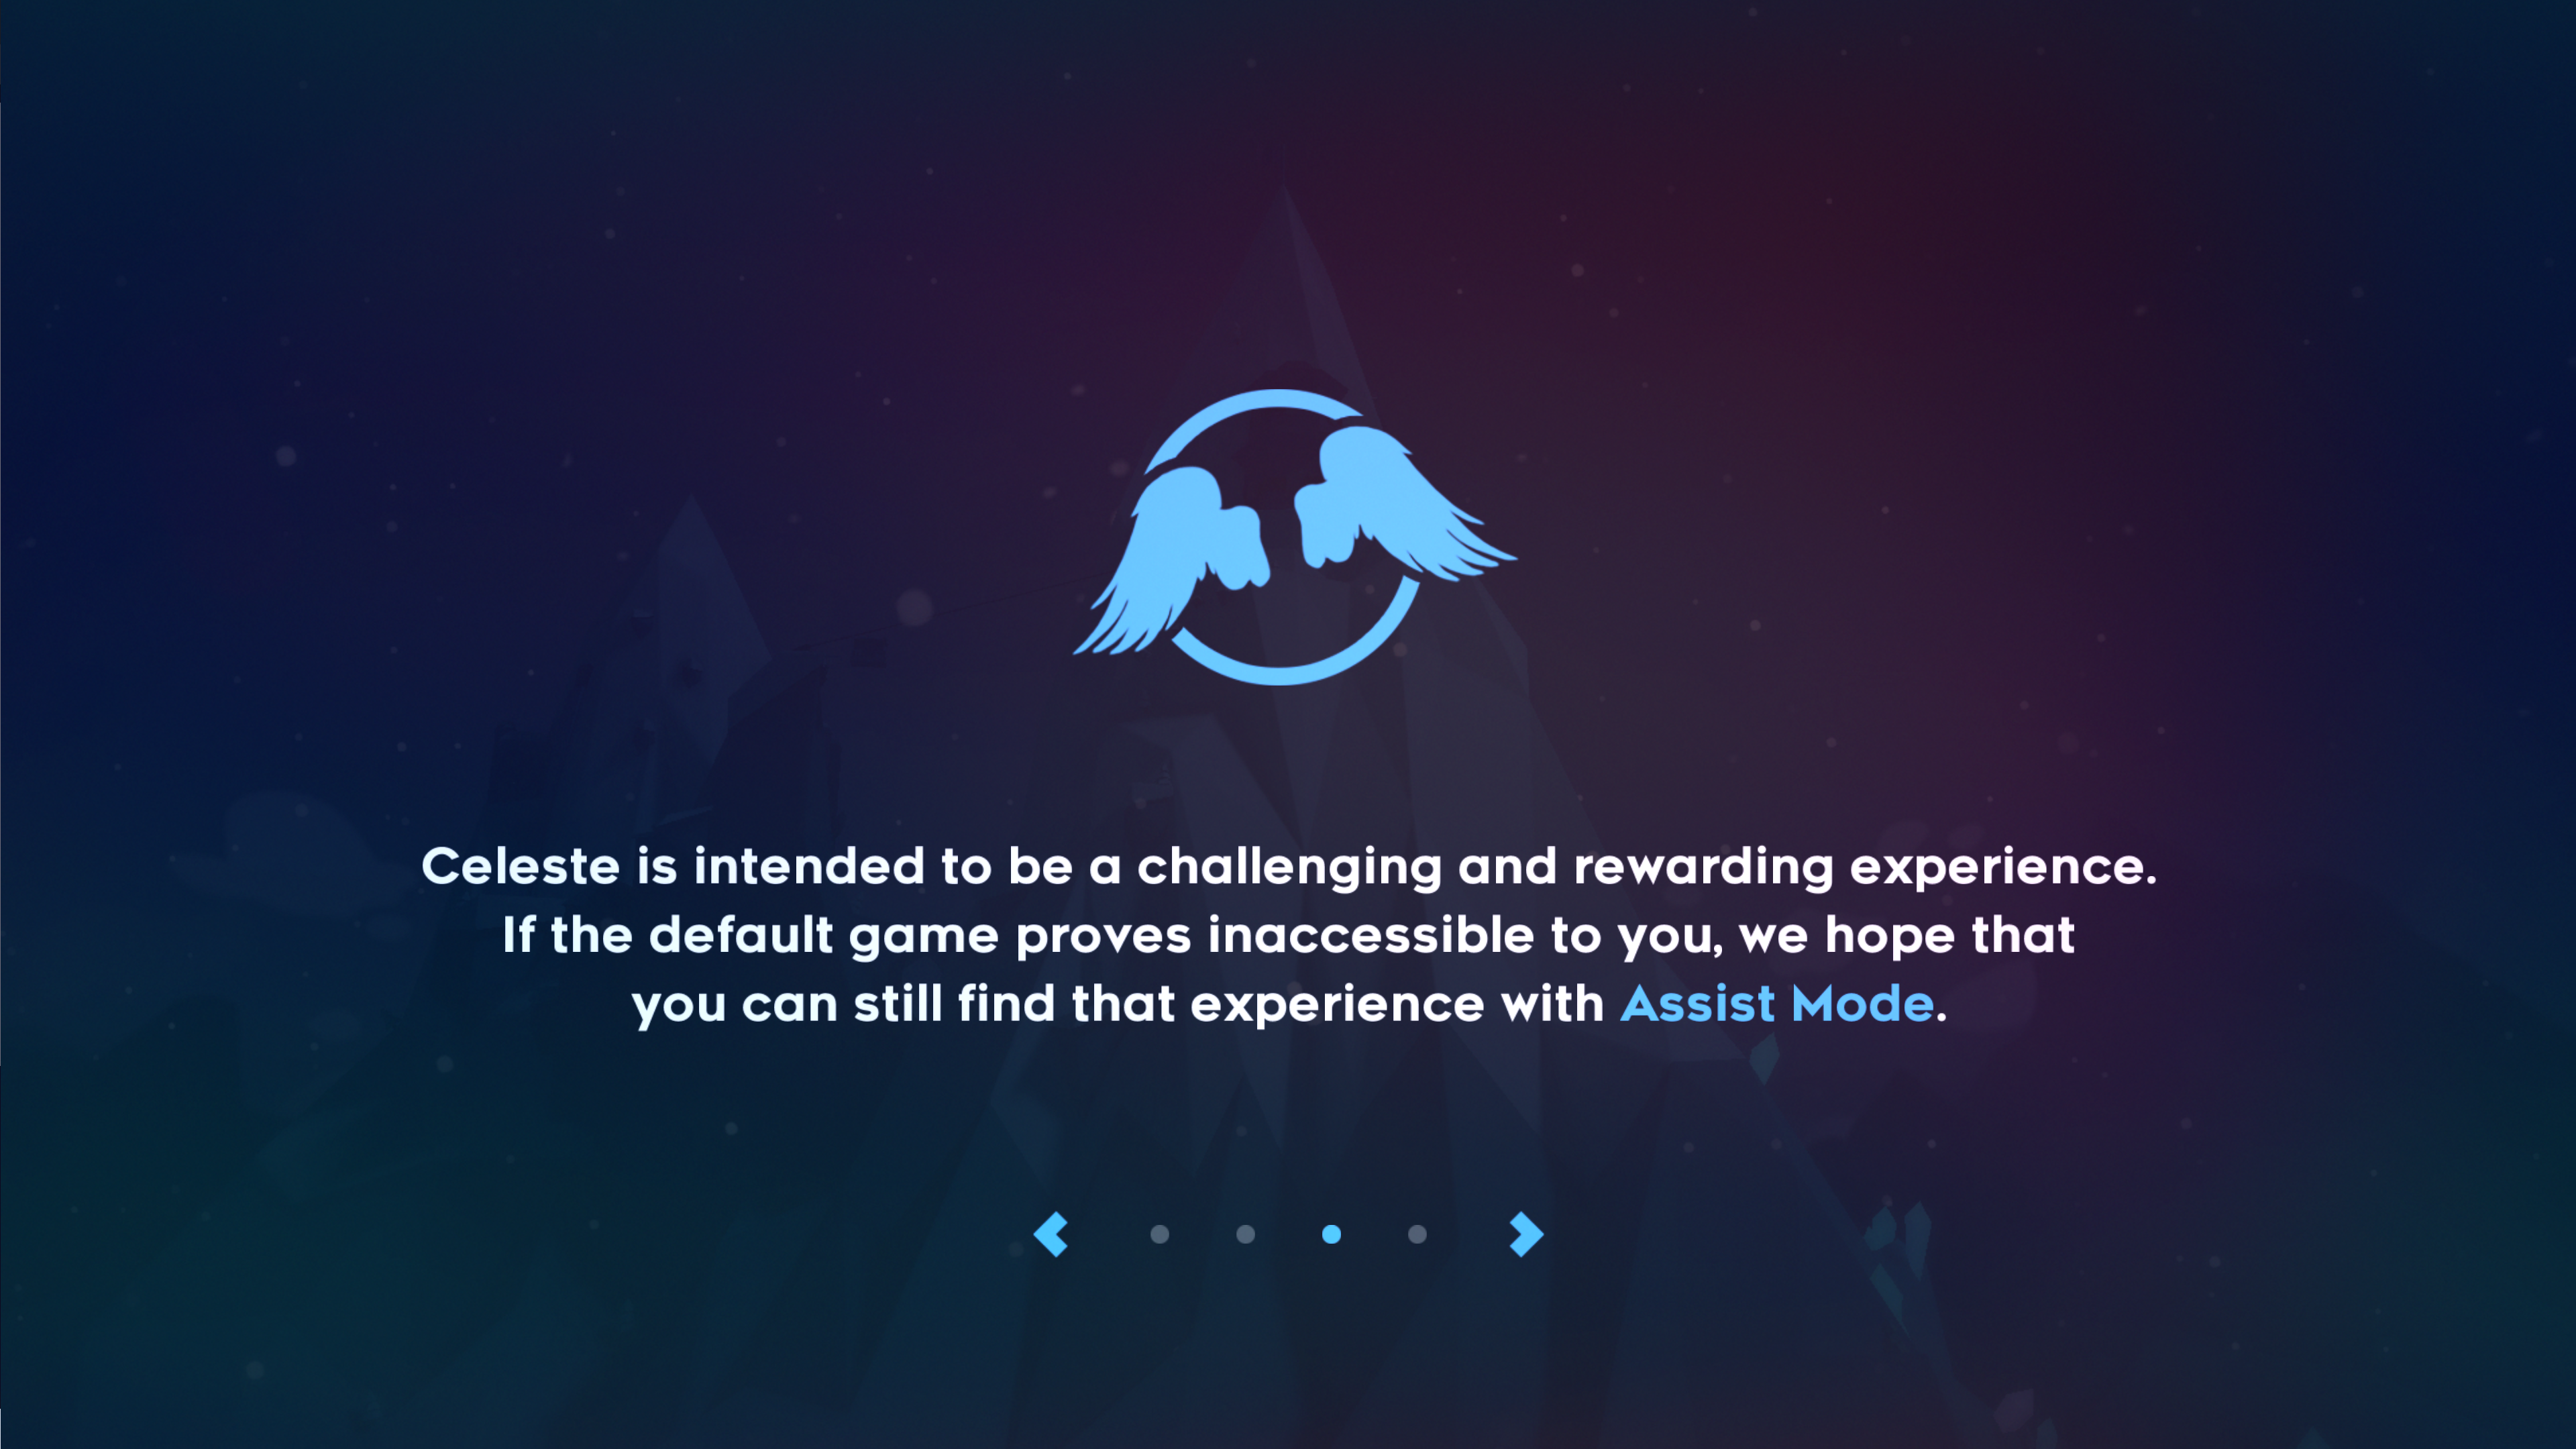 Celeste is intended to be a challenging and rewarding experience. If the default game proves inaccessible to you, we hope that you can still find that experience with Assist Mode